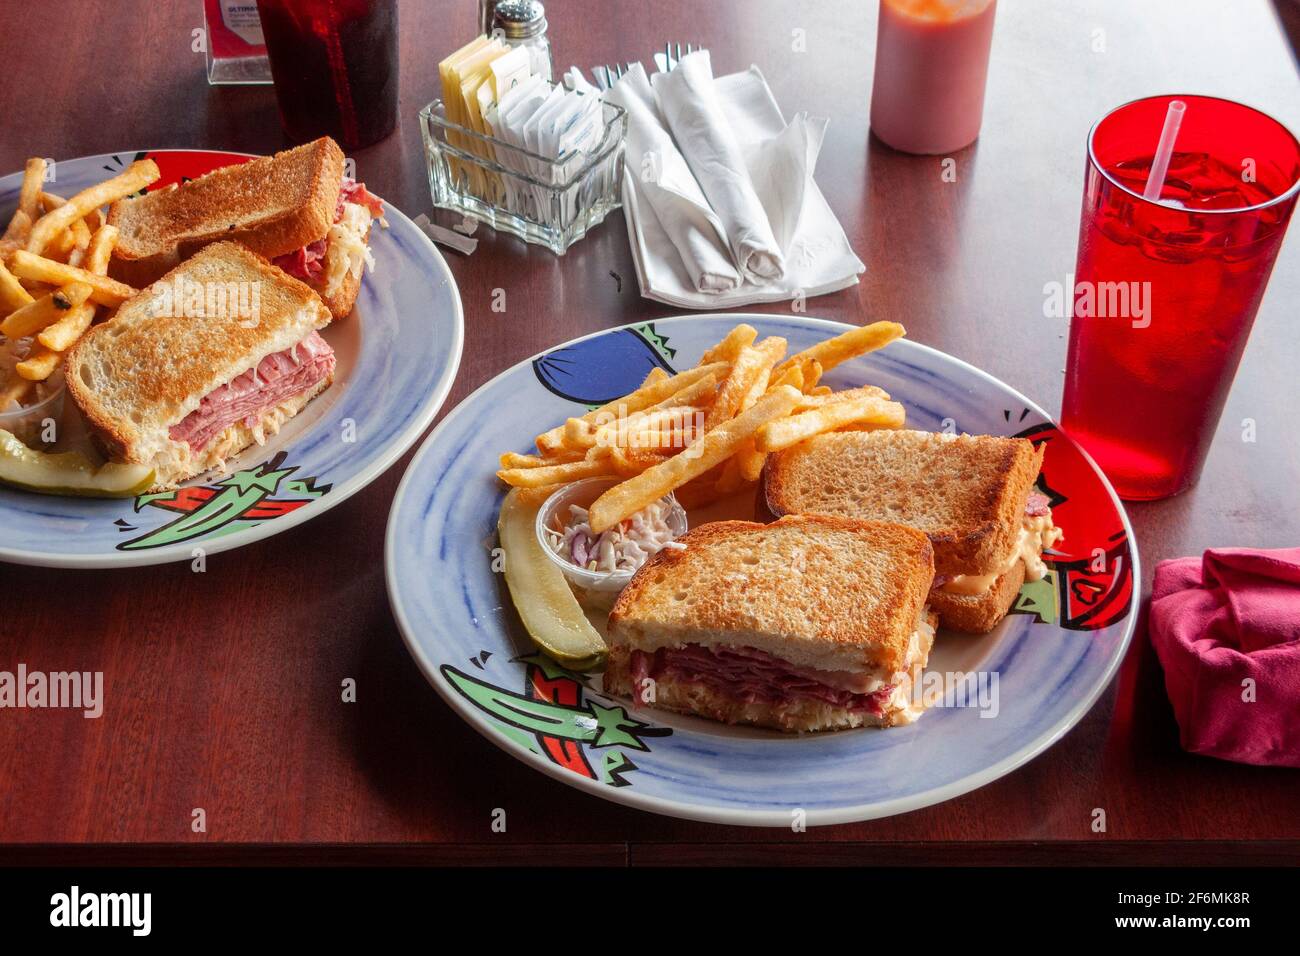 Two plates with Reuben sandwiches, dill pickle, cole slaw or coleslaw, with french fries or chips, with drinks. Stock Photo